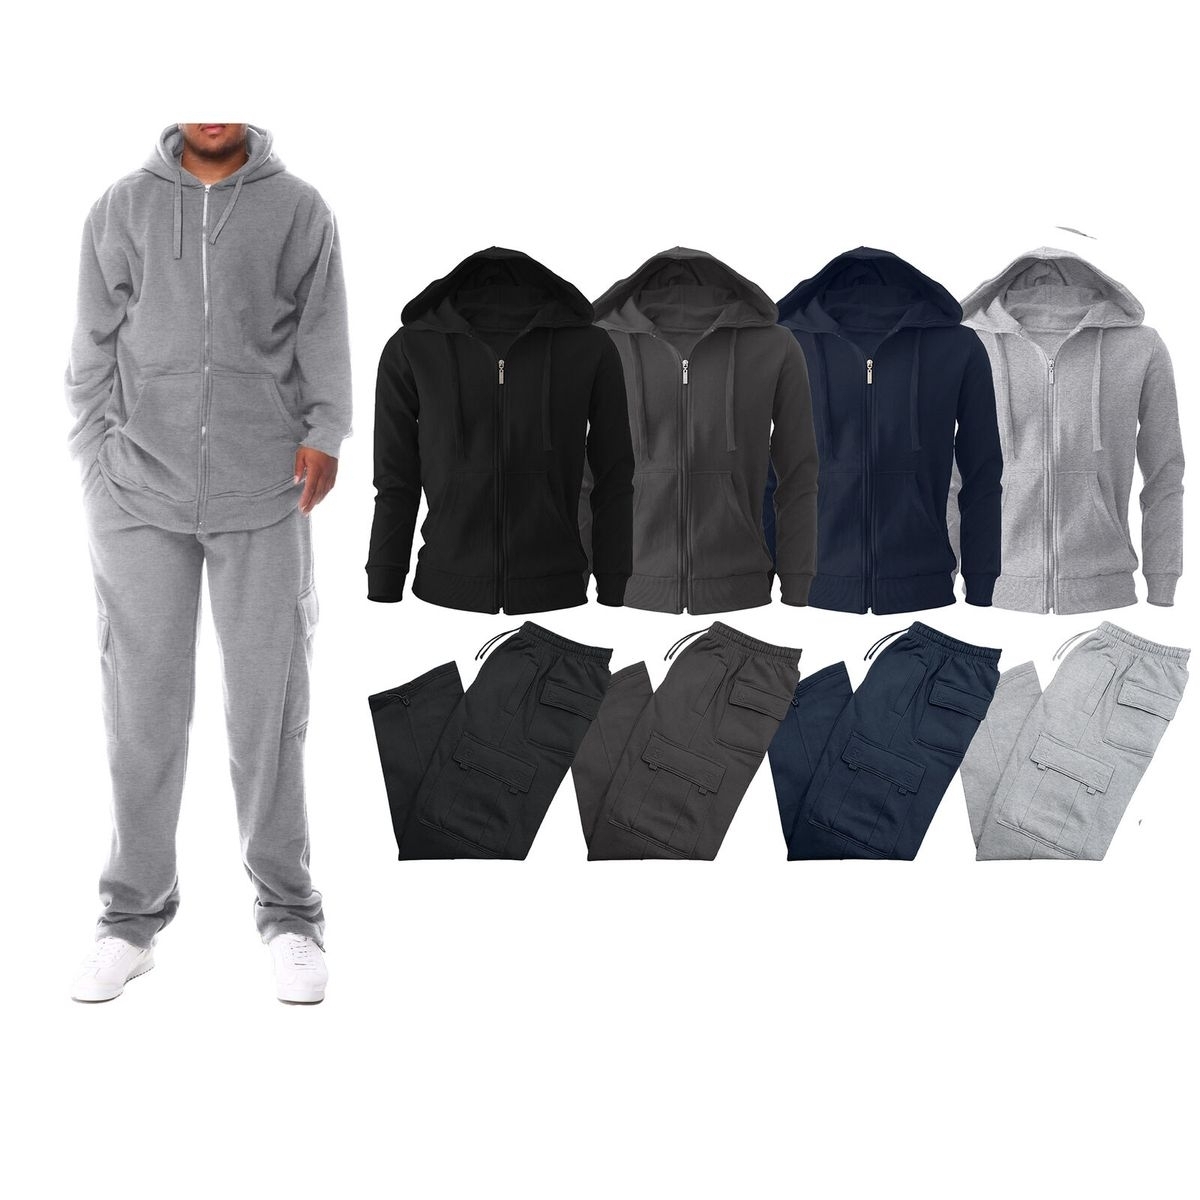 2-Pack: Men's Big & Tall Winter Warm Athletic Active Cozy Fleece Lined Multi-Pocket Full Zip Up Cargo Tracksuit - Navy, X-large